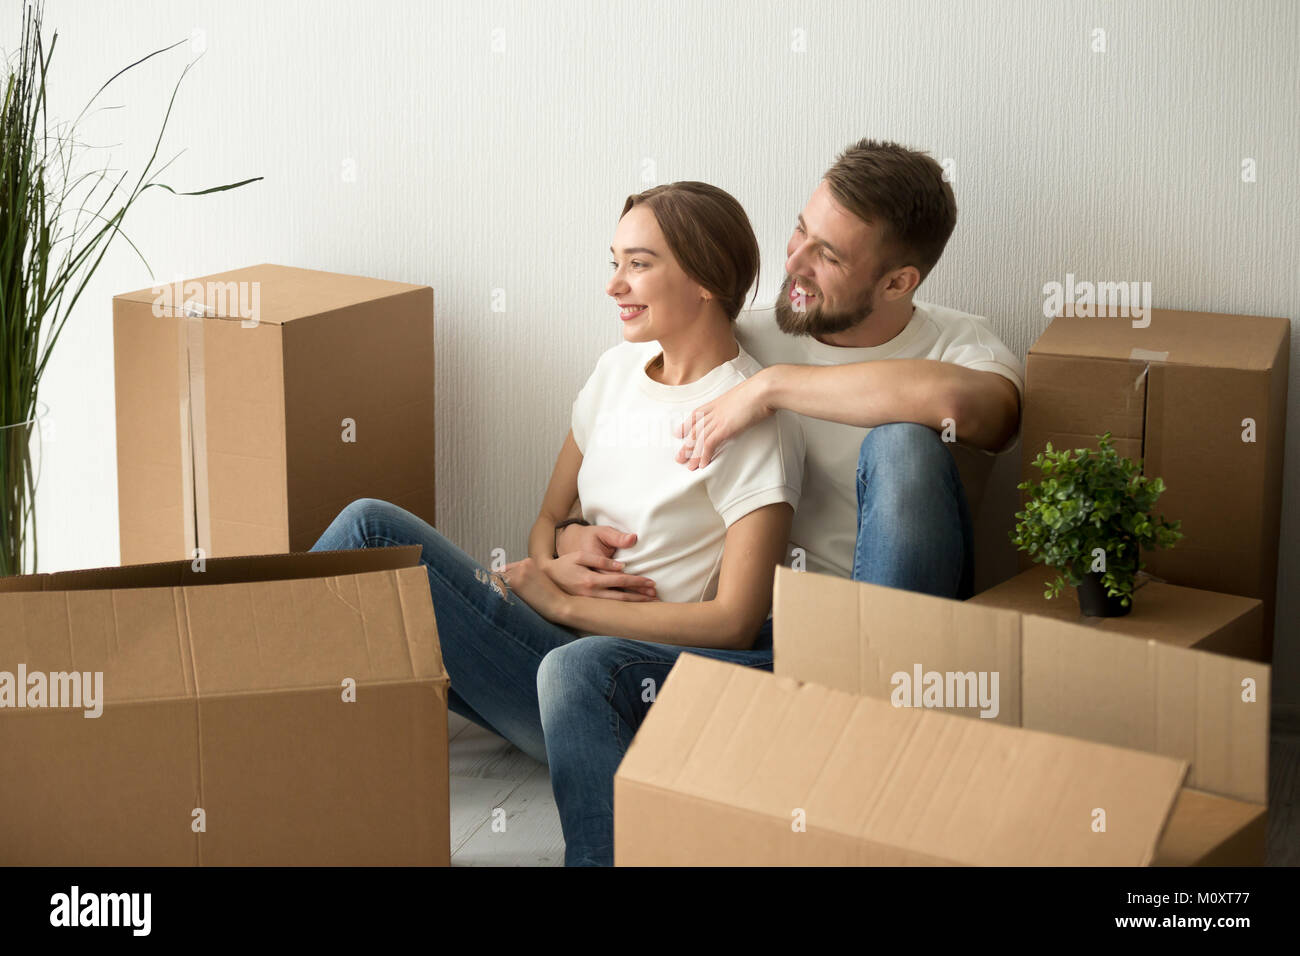 Young couple embracing looking forward to future in new home Stock Photo